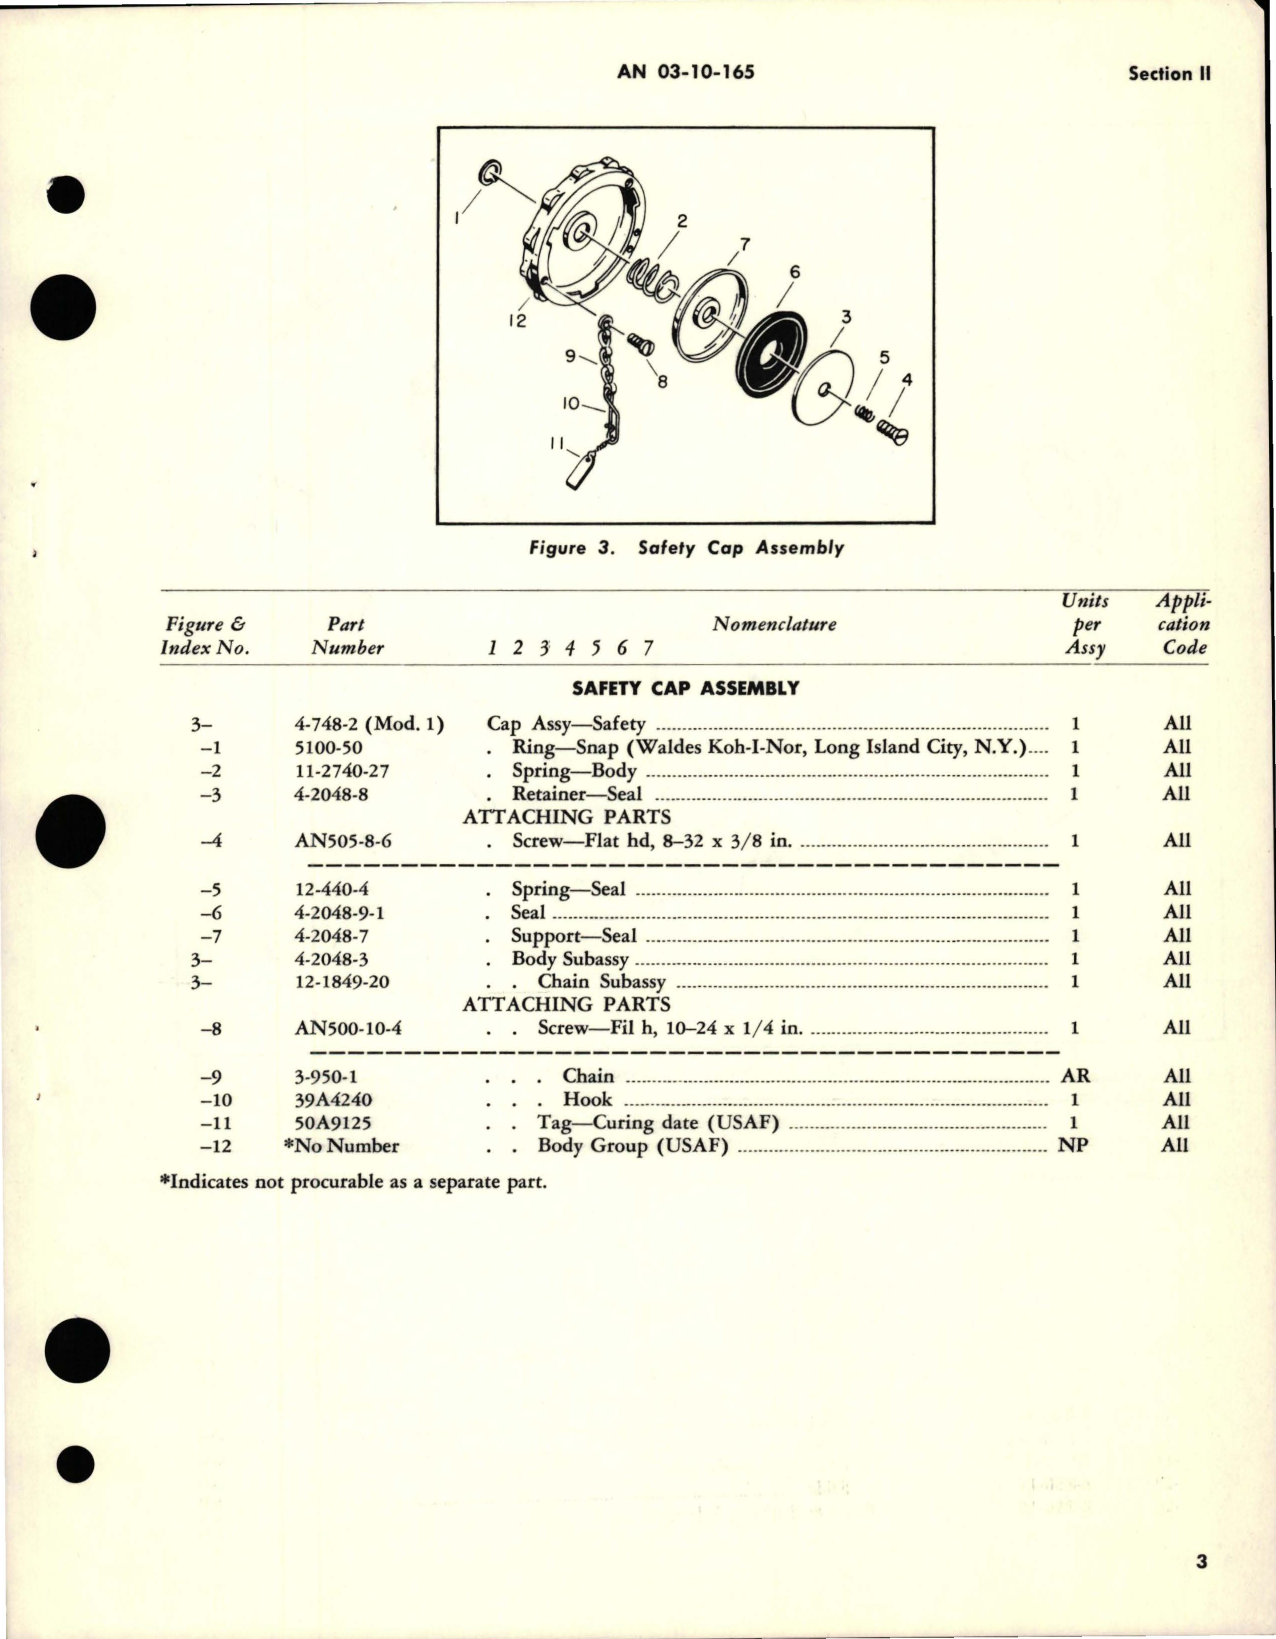 Sample page 5 from AirCorps Library document: Parts Catalog for Adapter Valve, Safety Cap, and Dual Diaphragm Unit - Part 1322-527058, 8-850-3